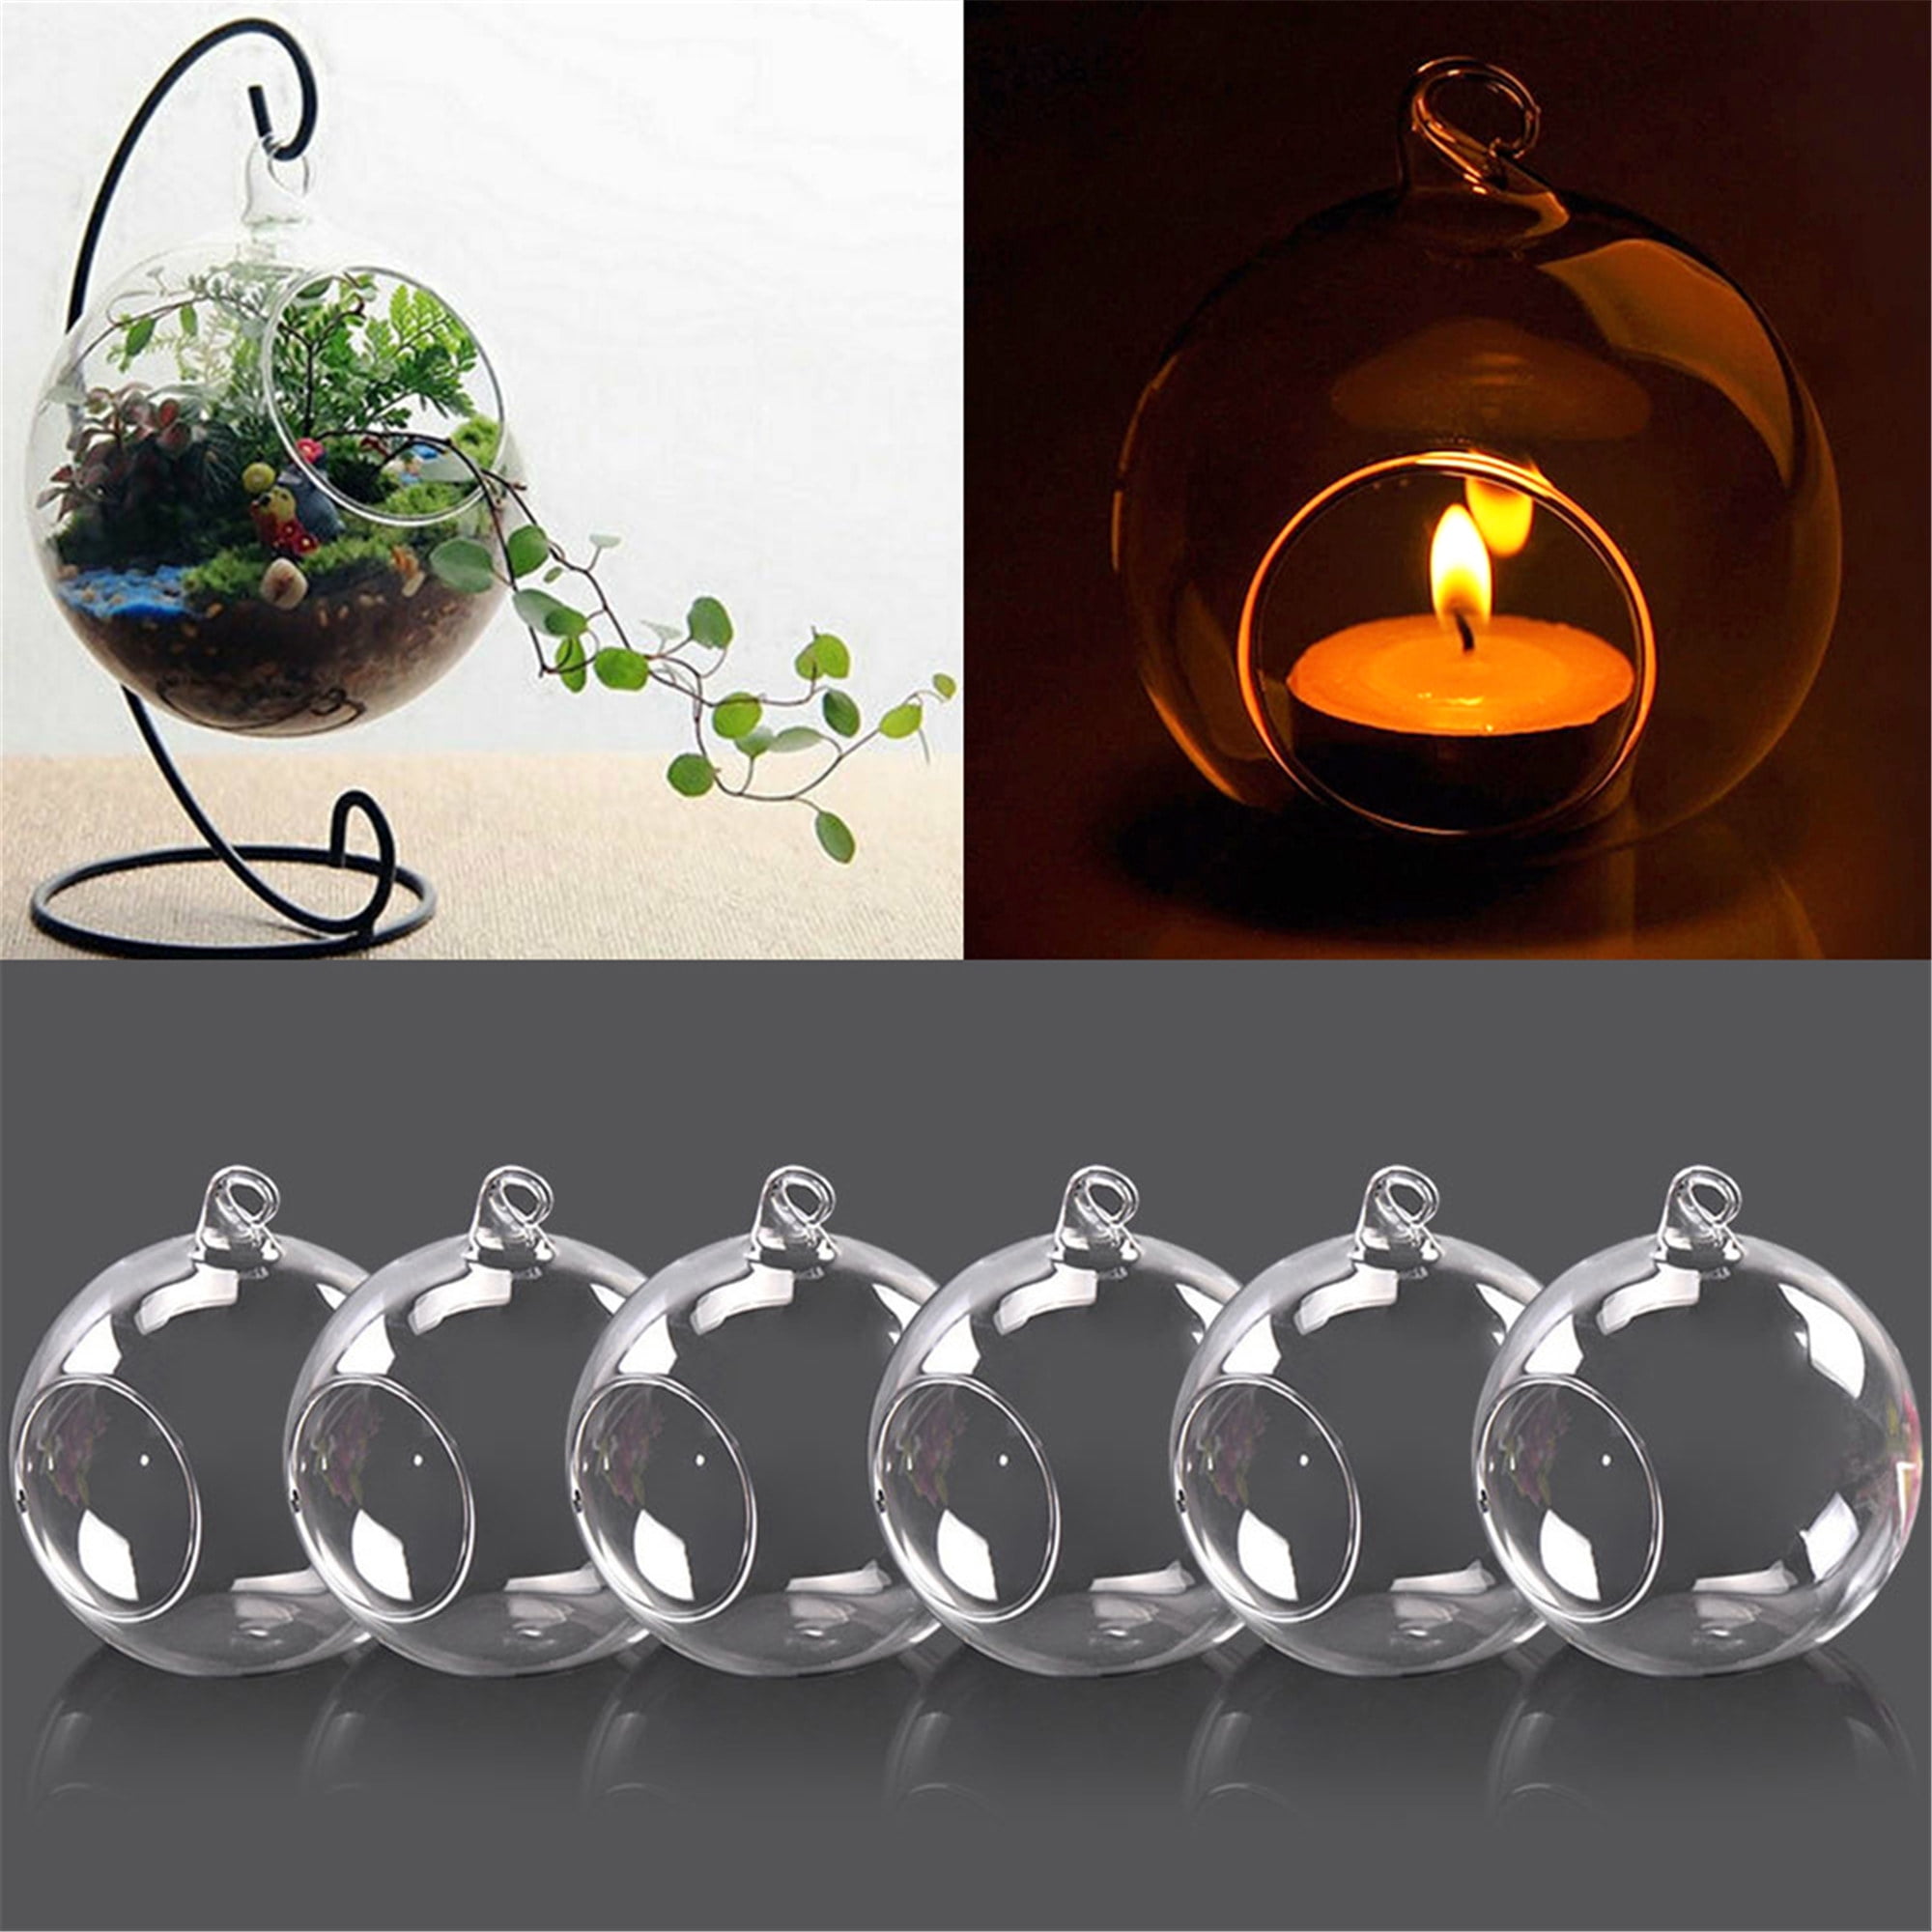 12pcs Globe Ornament for Air Plant 2.36 Inches Diameter Wedding Party Tree Decoration 12 Pcs Hanging Tealight Candle Hoder Glass Globes Terrarium